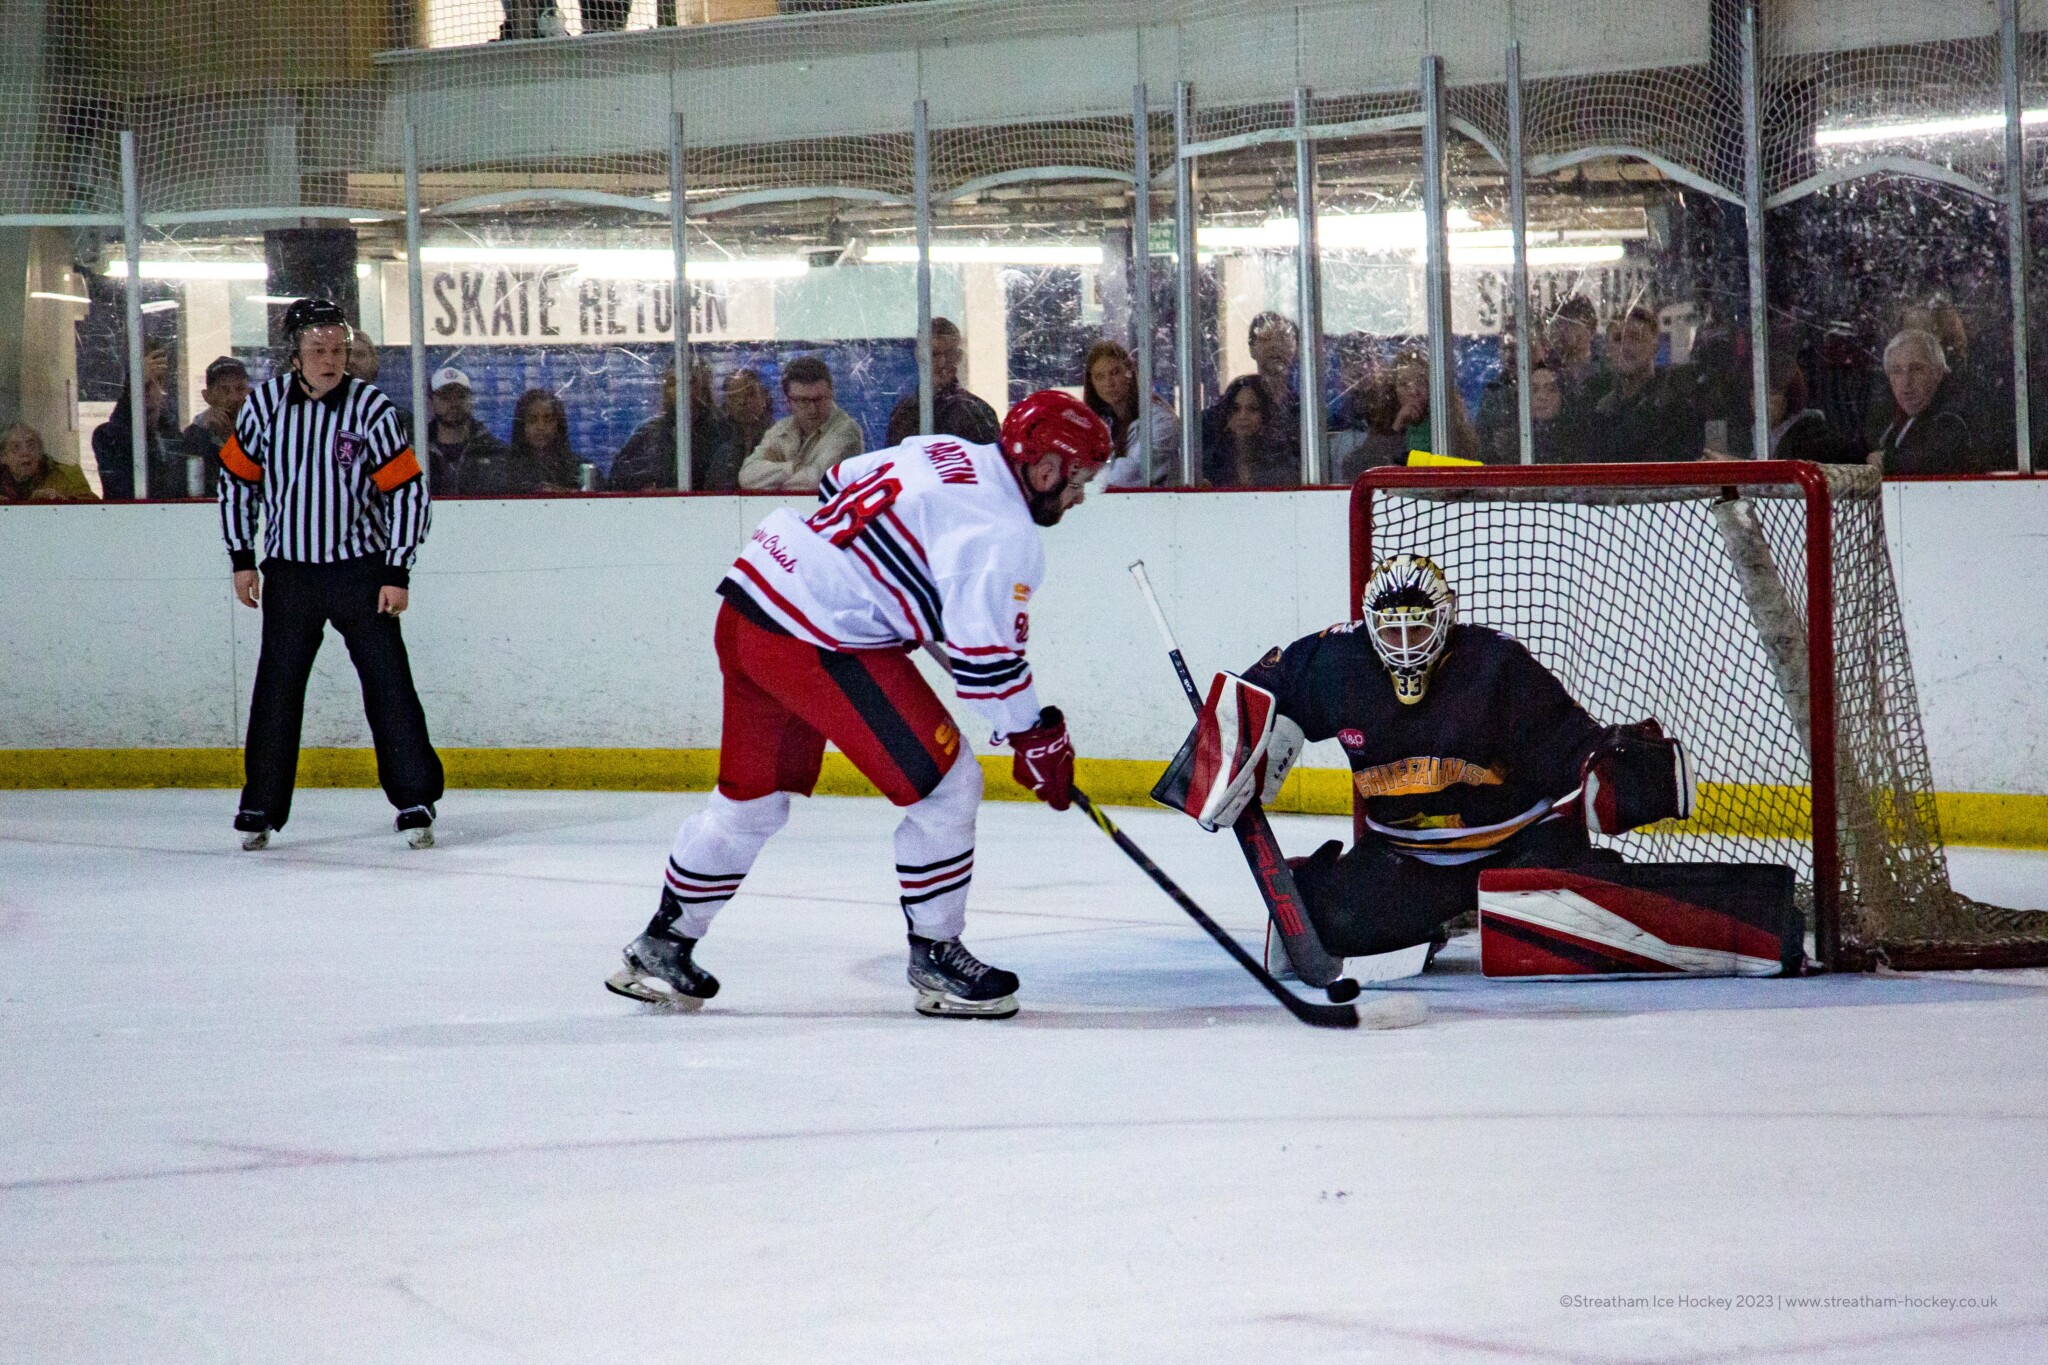 Ice hockey: Streatham suffer shootout defeat vs Chelmsford Chieftains - South London News